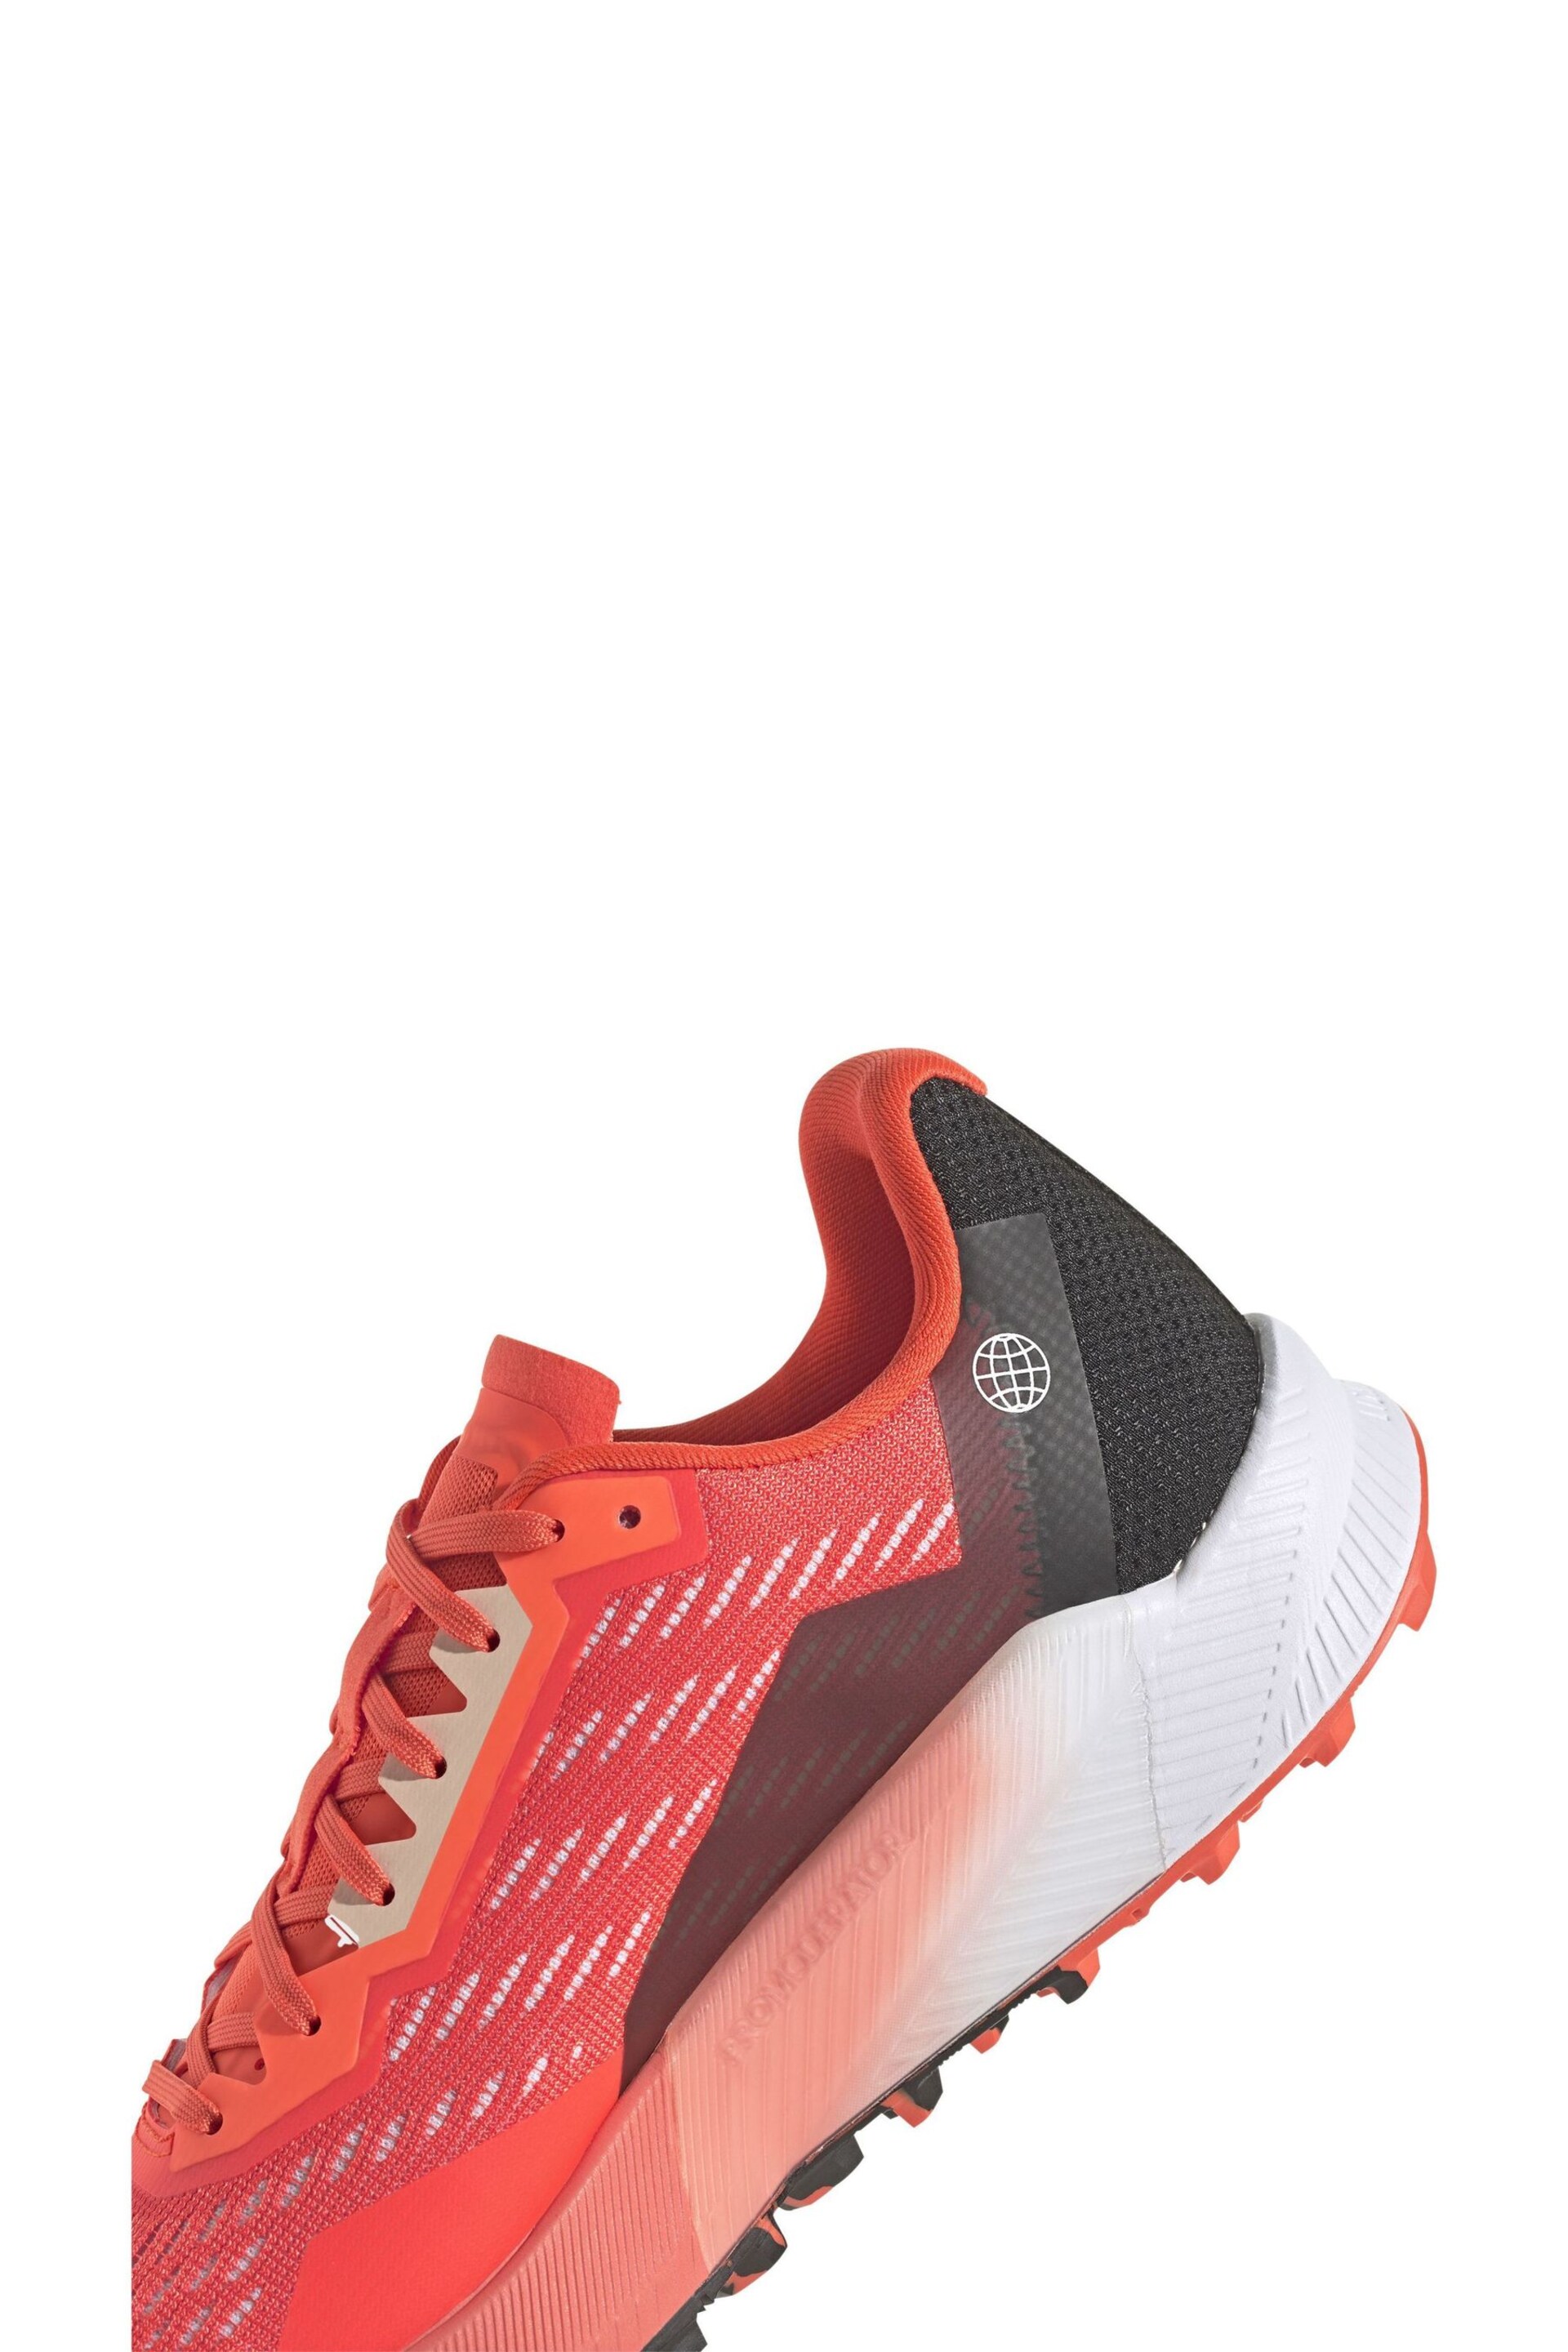 adidas Terrex Agravic Flow 2.0 Trail Running Trainers - Image 9 of 9